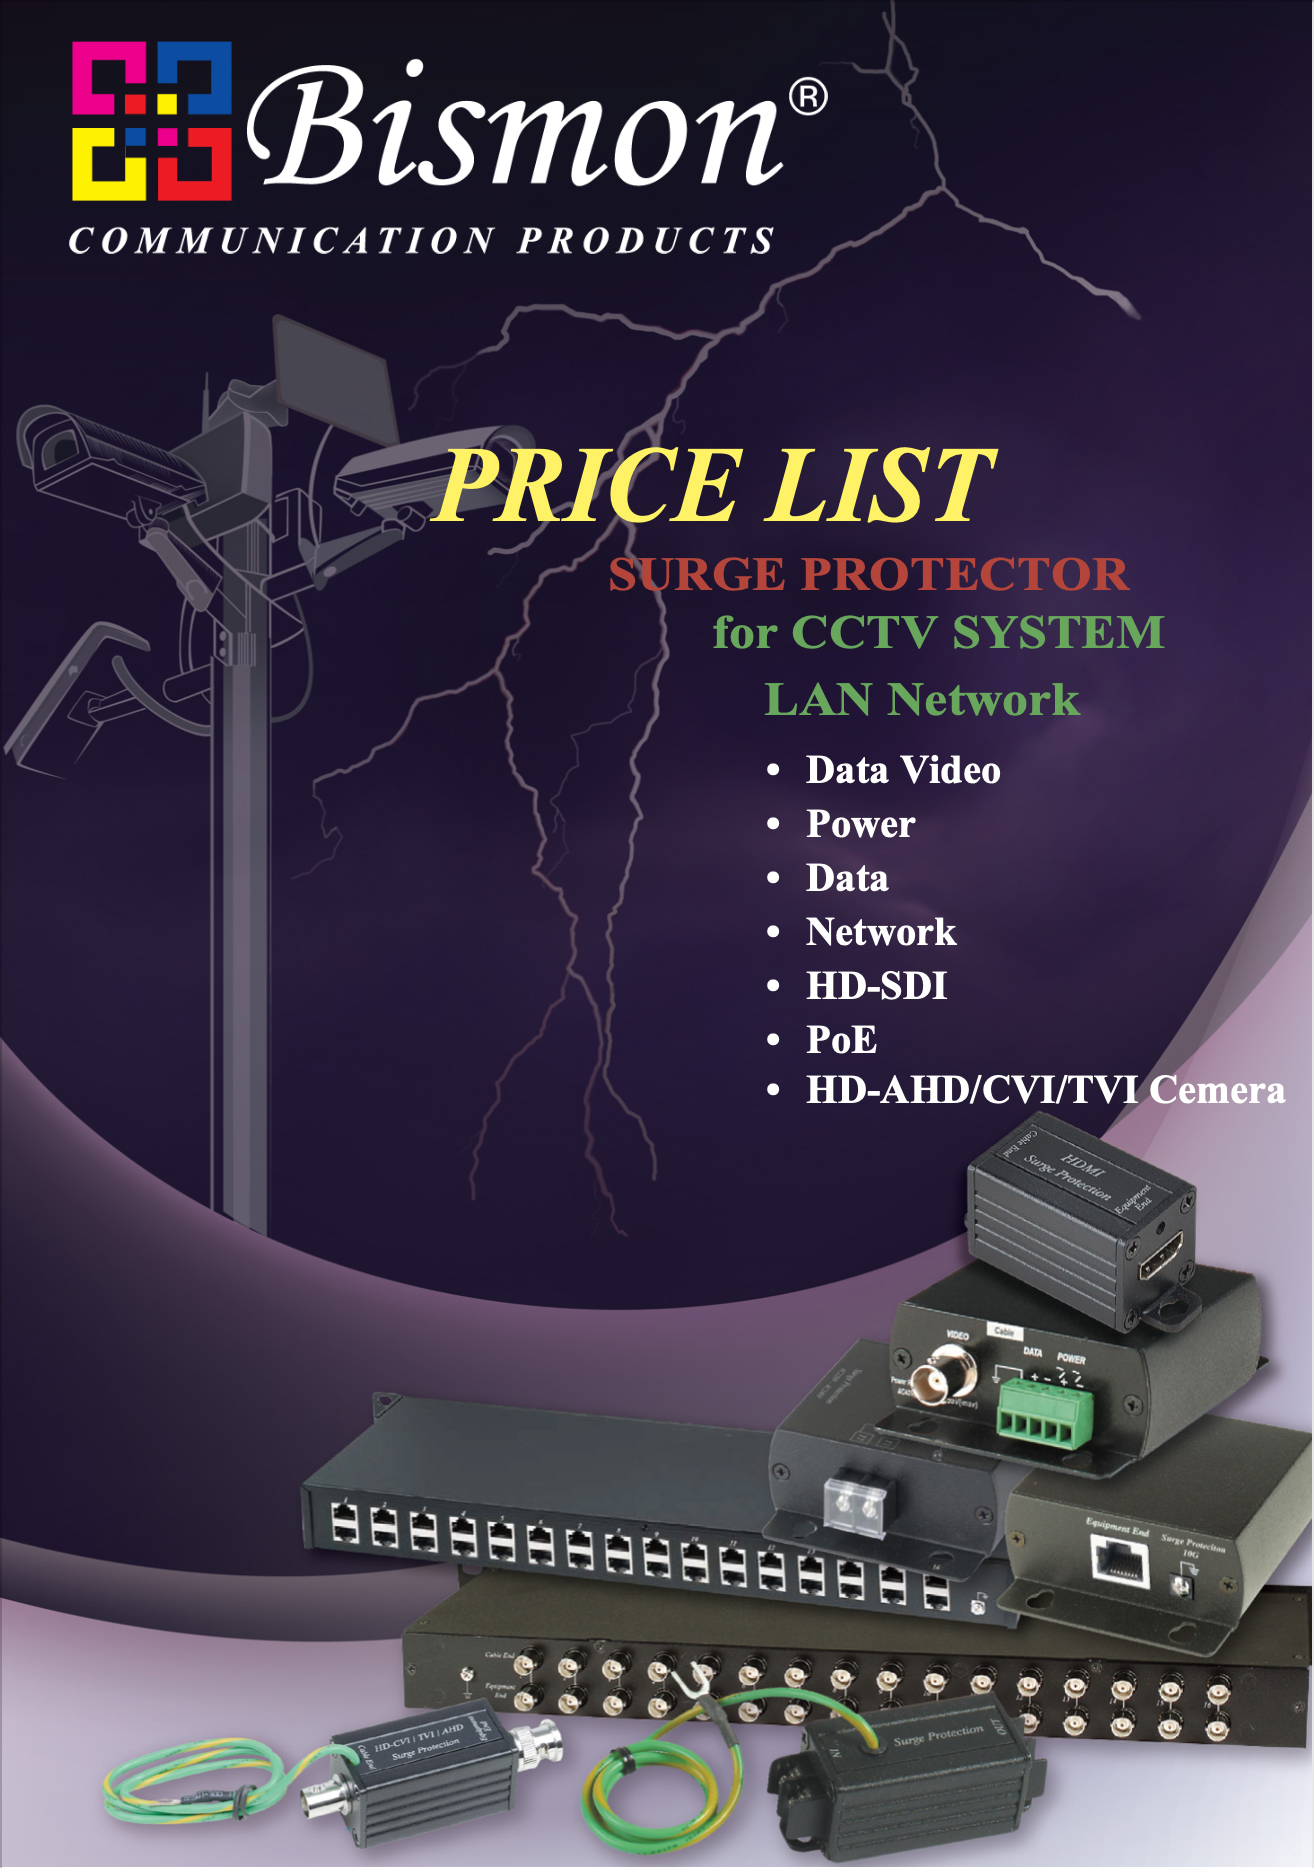 Surge Protector for CCTV & LAN Network Solution (2.9MB)